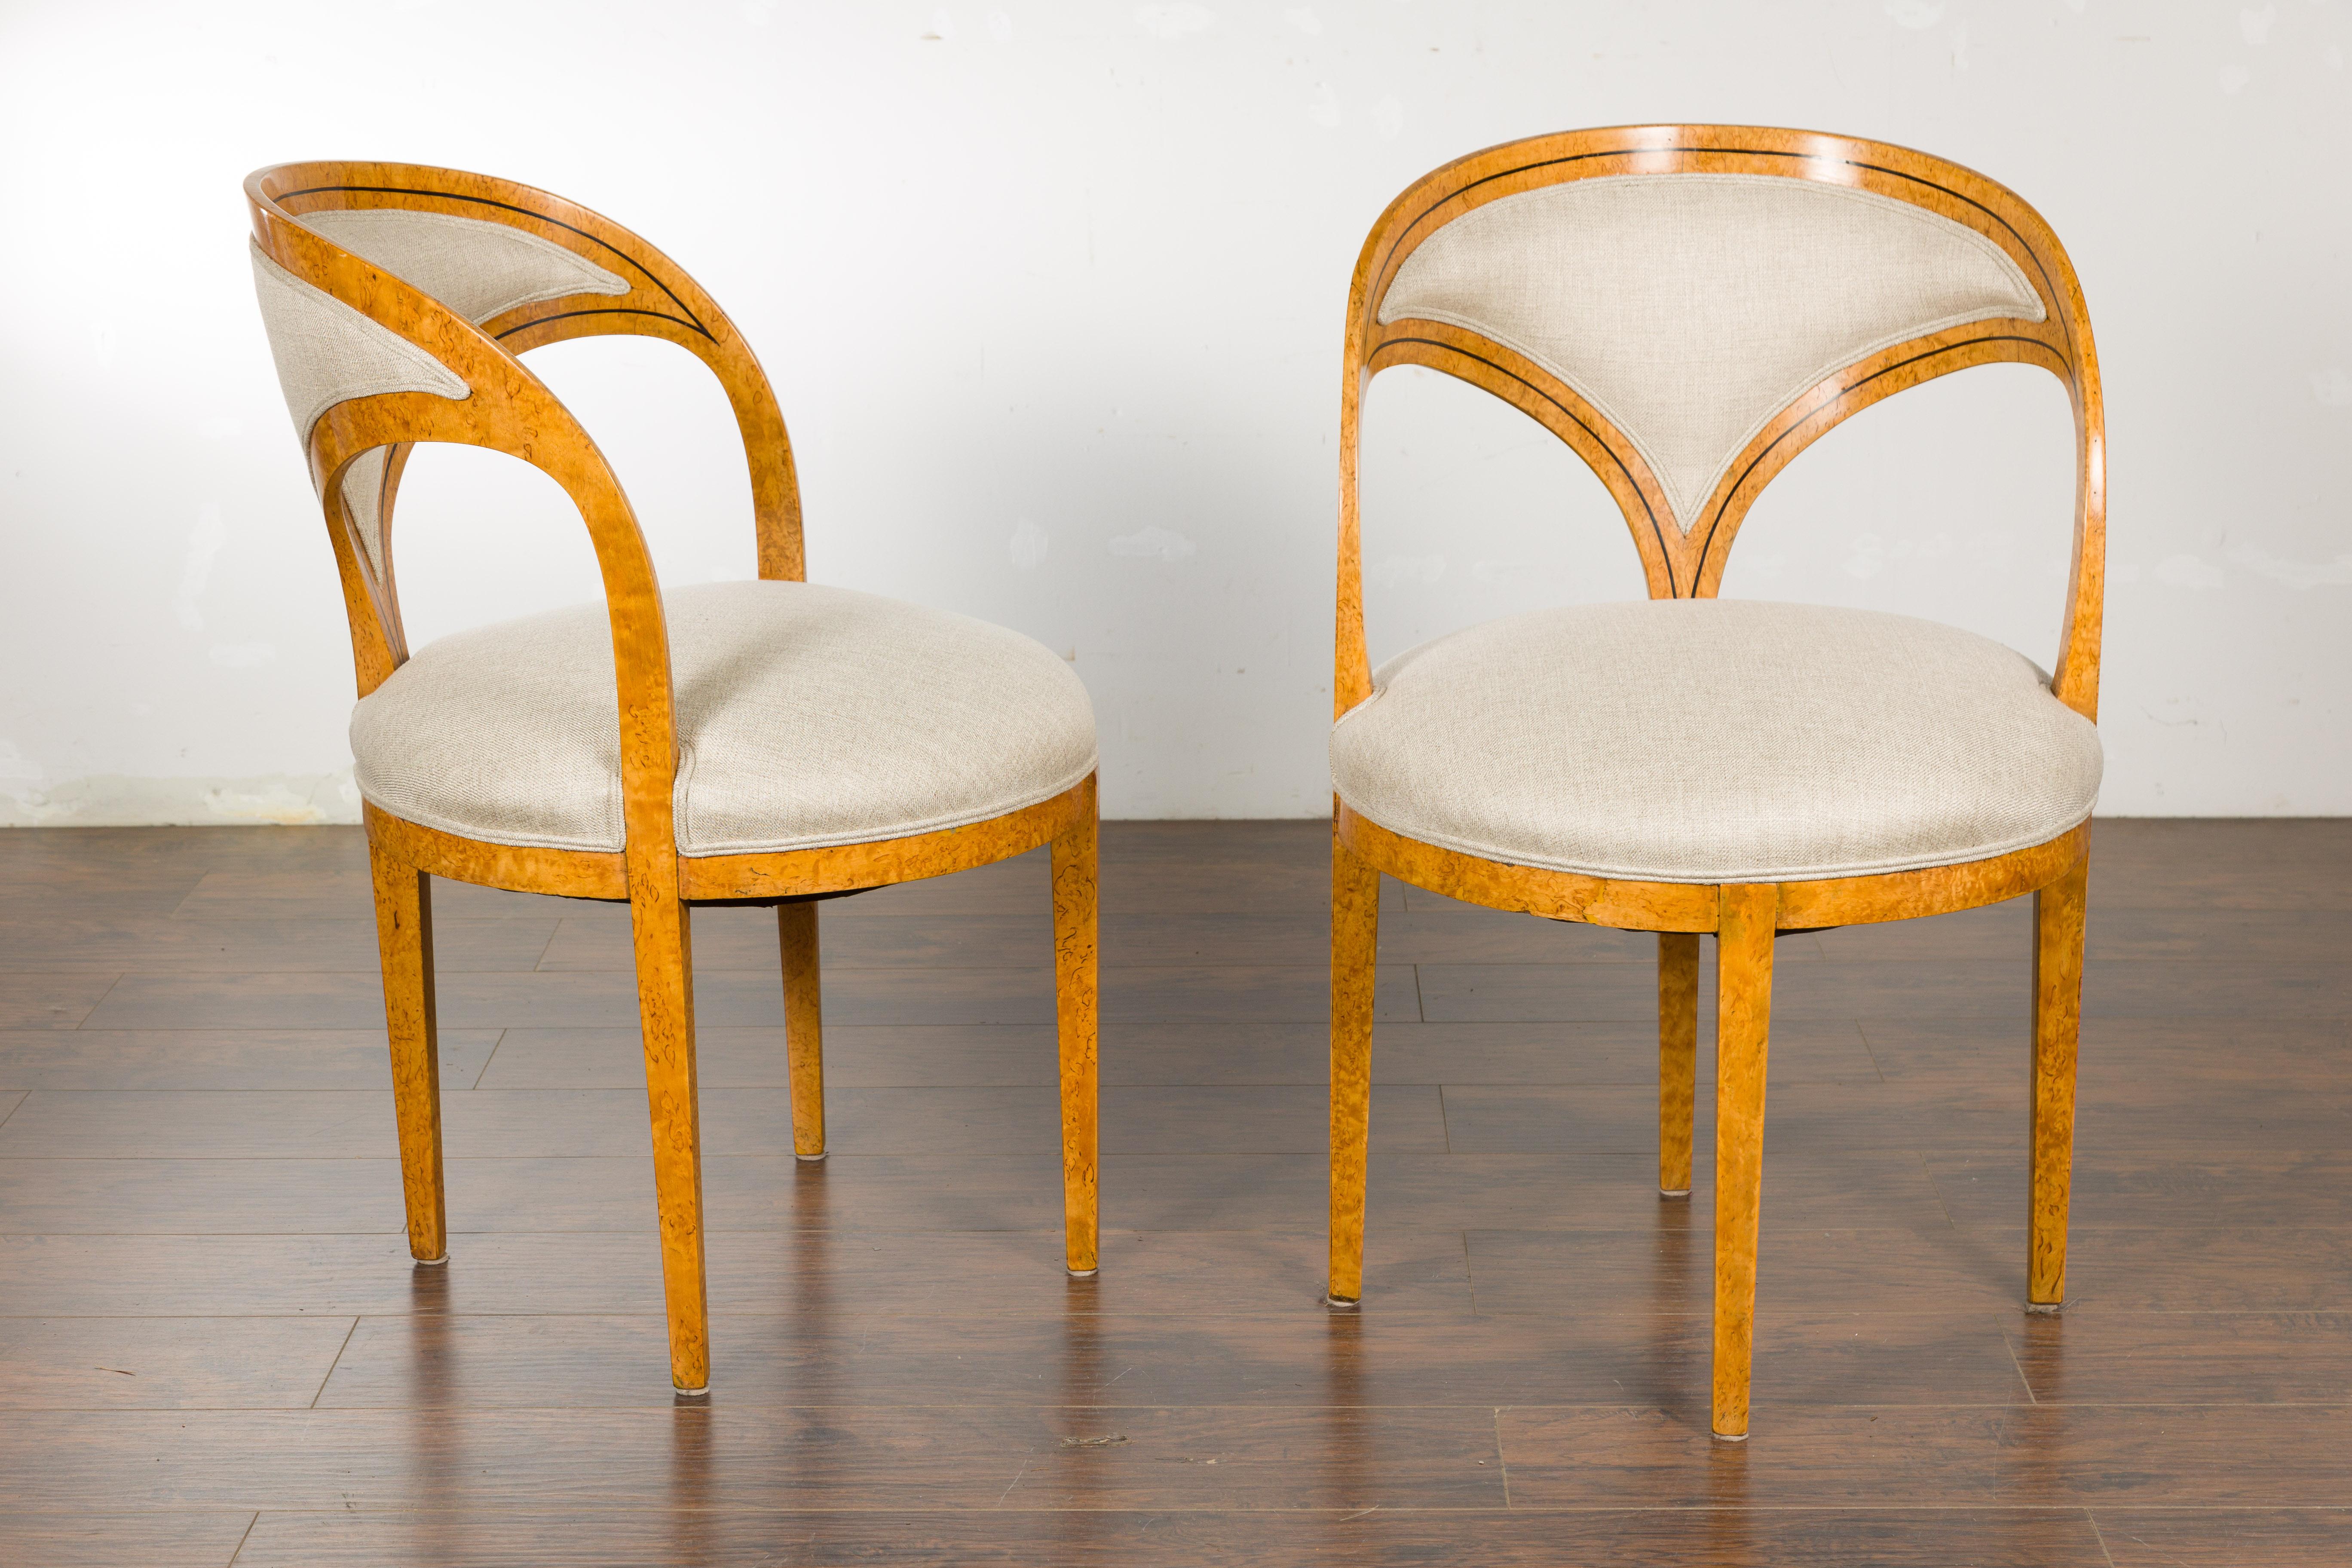 Biedermeier 19th Century Chairs with Ebonized Accents and New Upholstery, a Pair For Sale 8